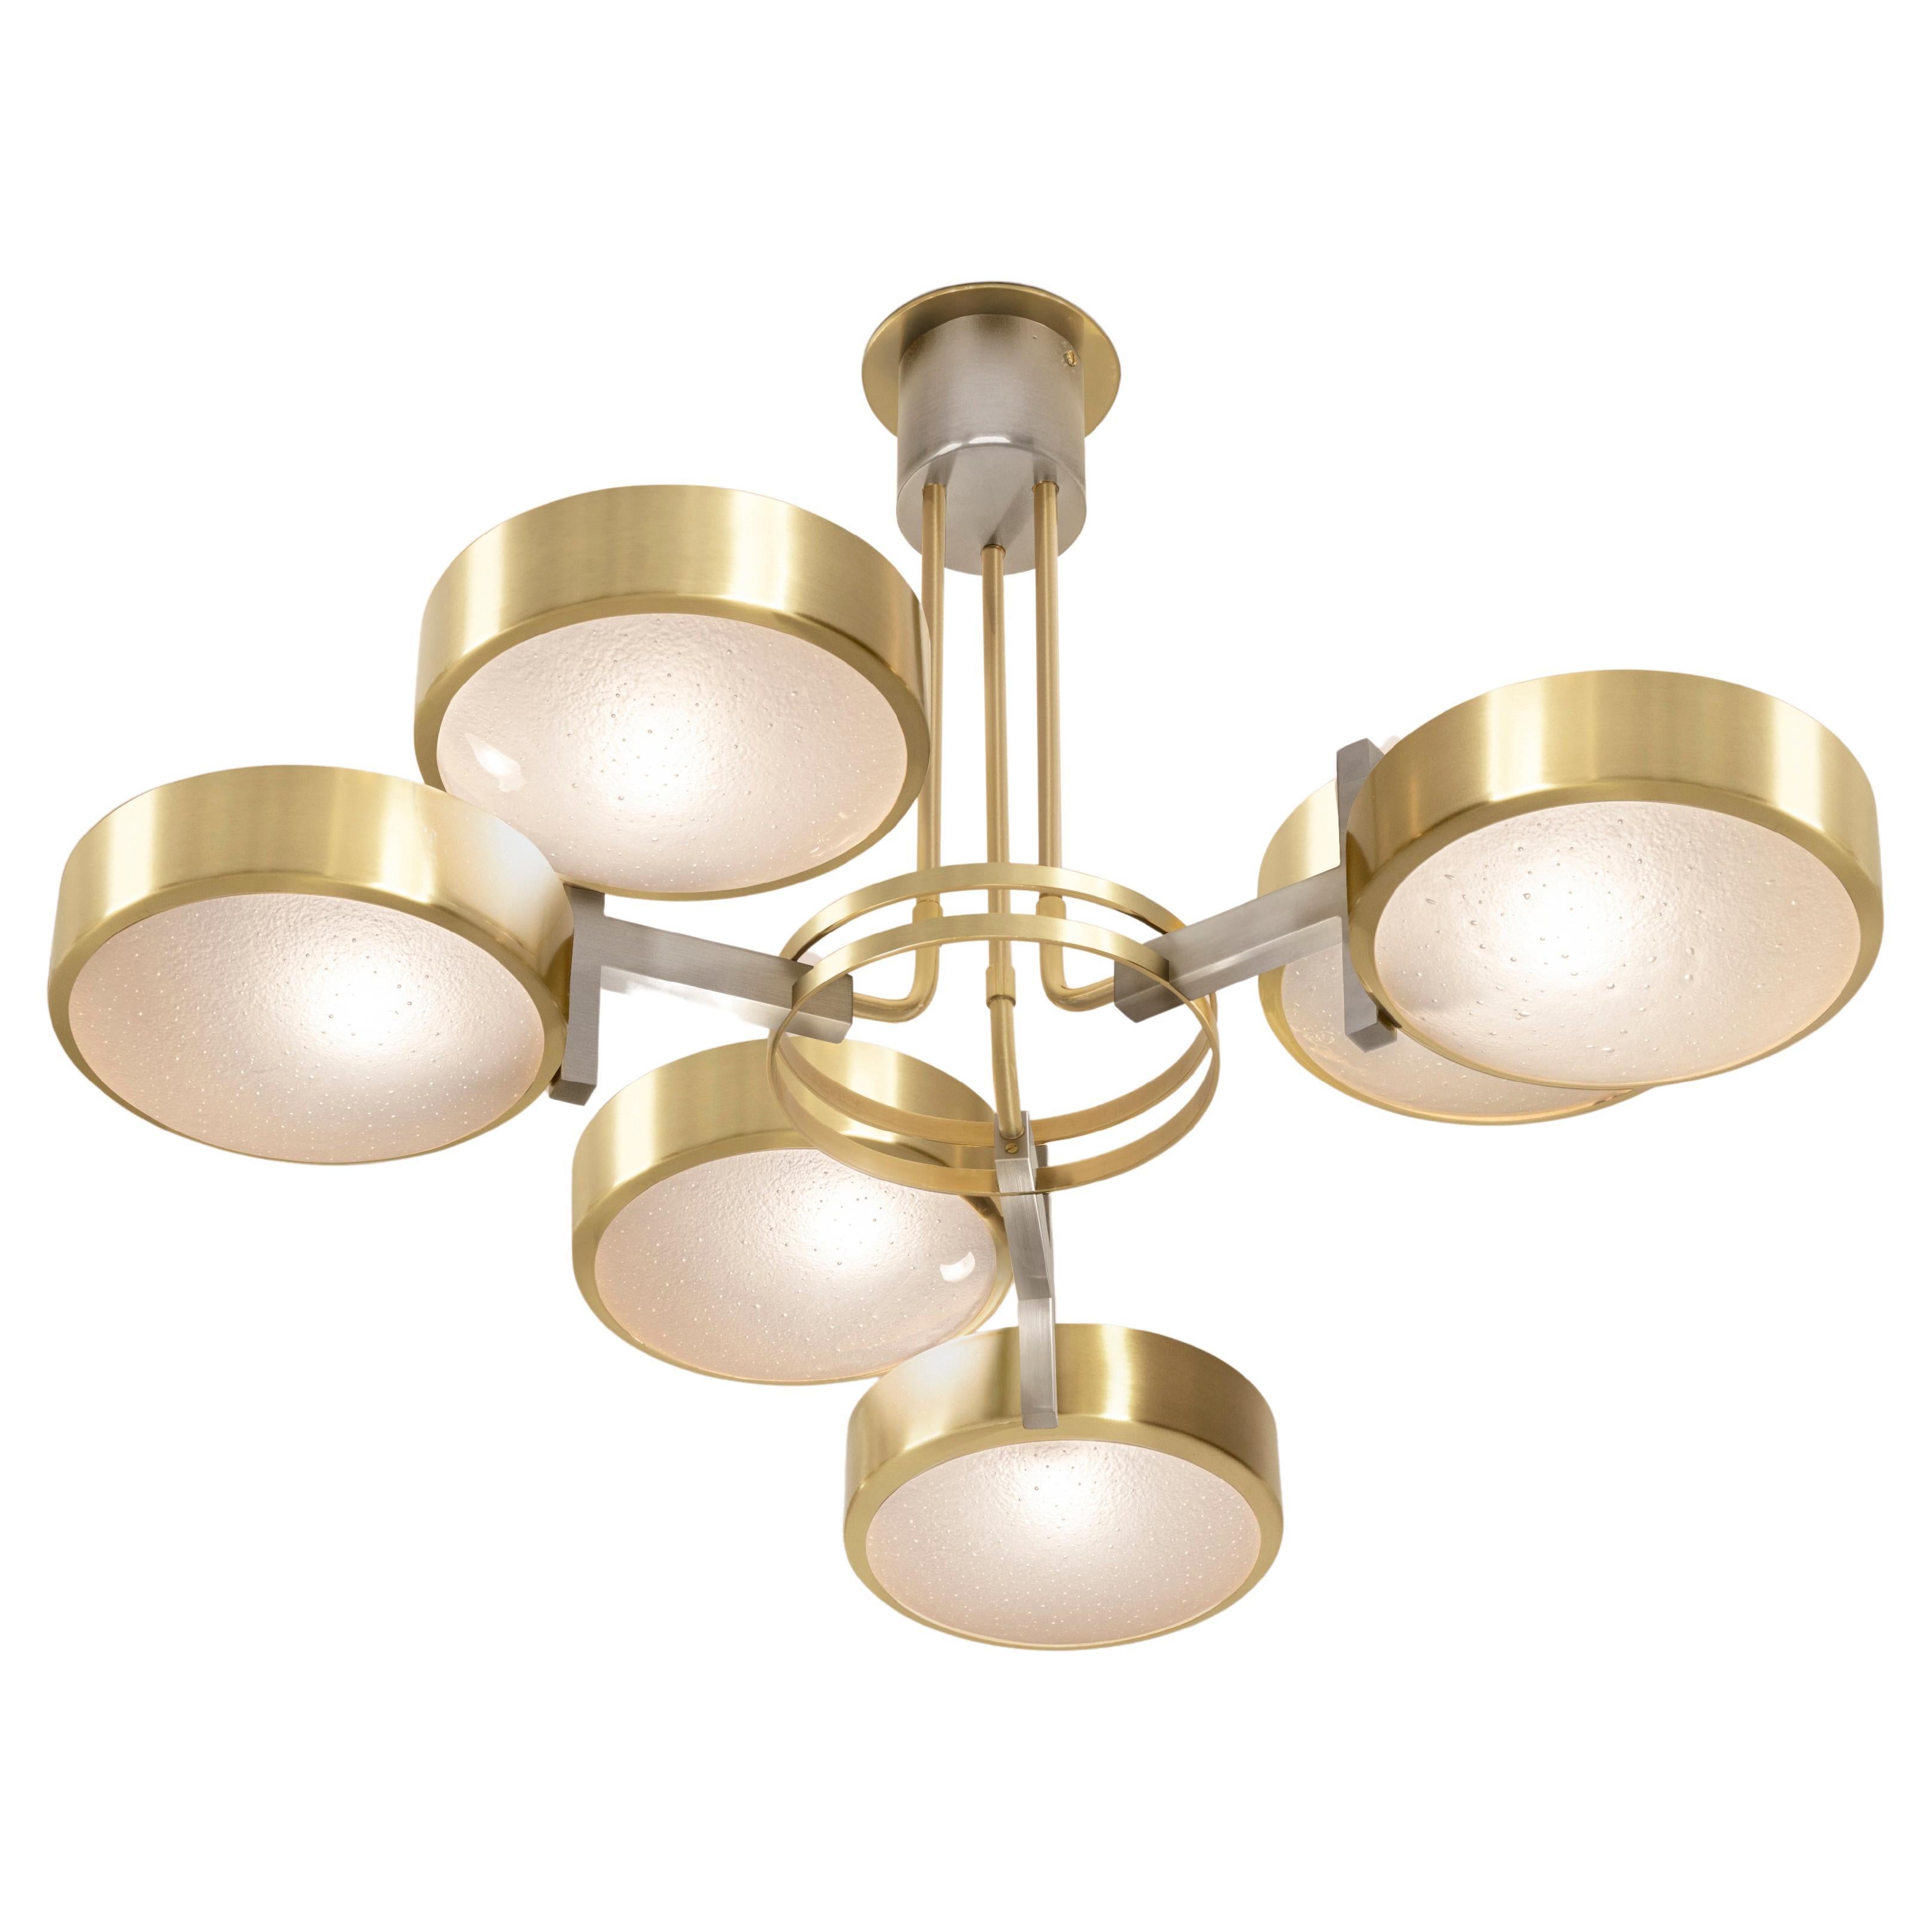 Eclissi Ceiling Light by Gaspare Asaro- Satin Brass and Satin Nickel Finish For Sale